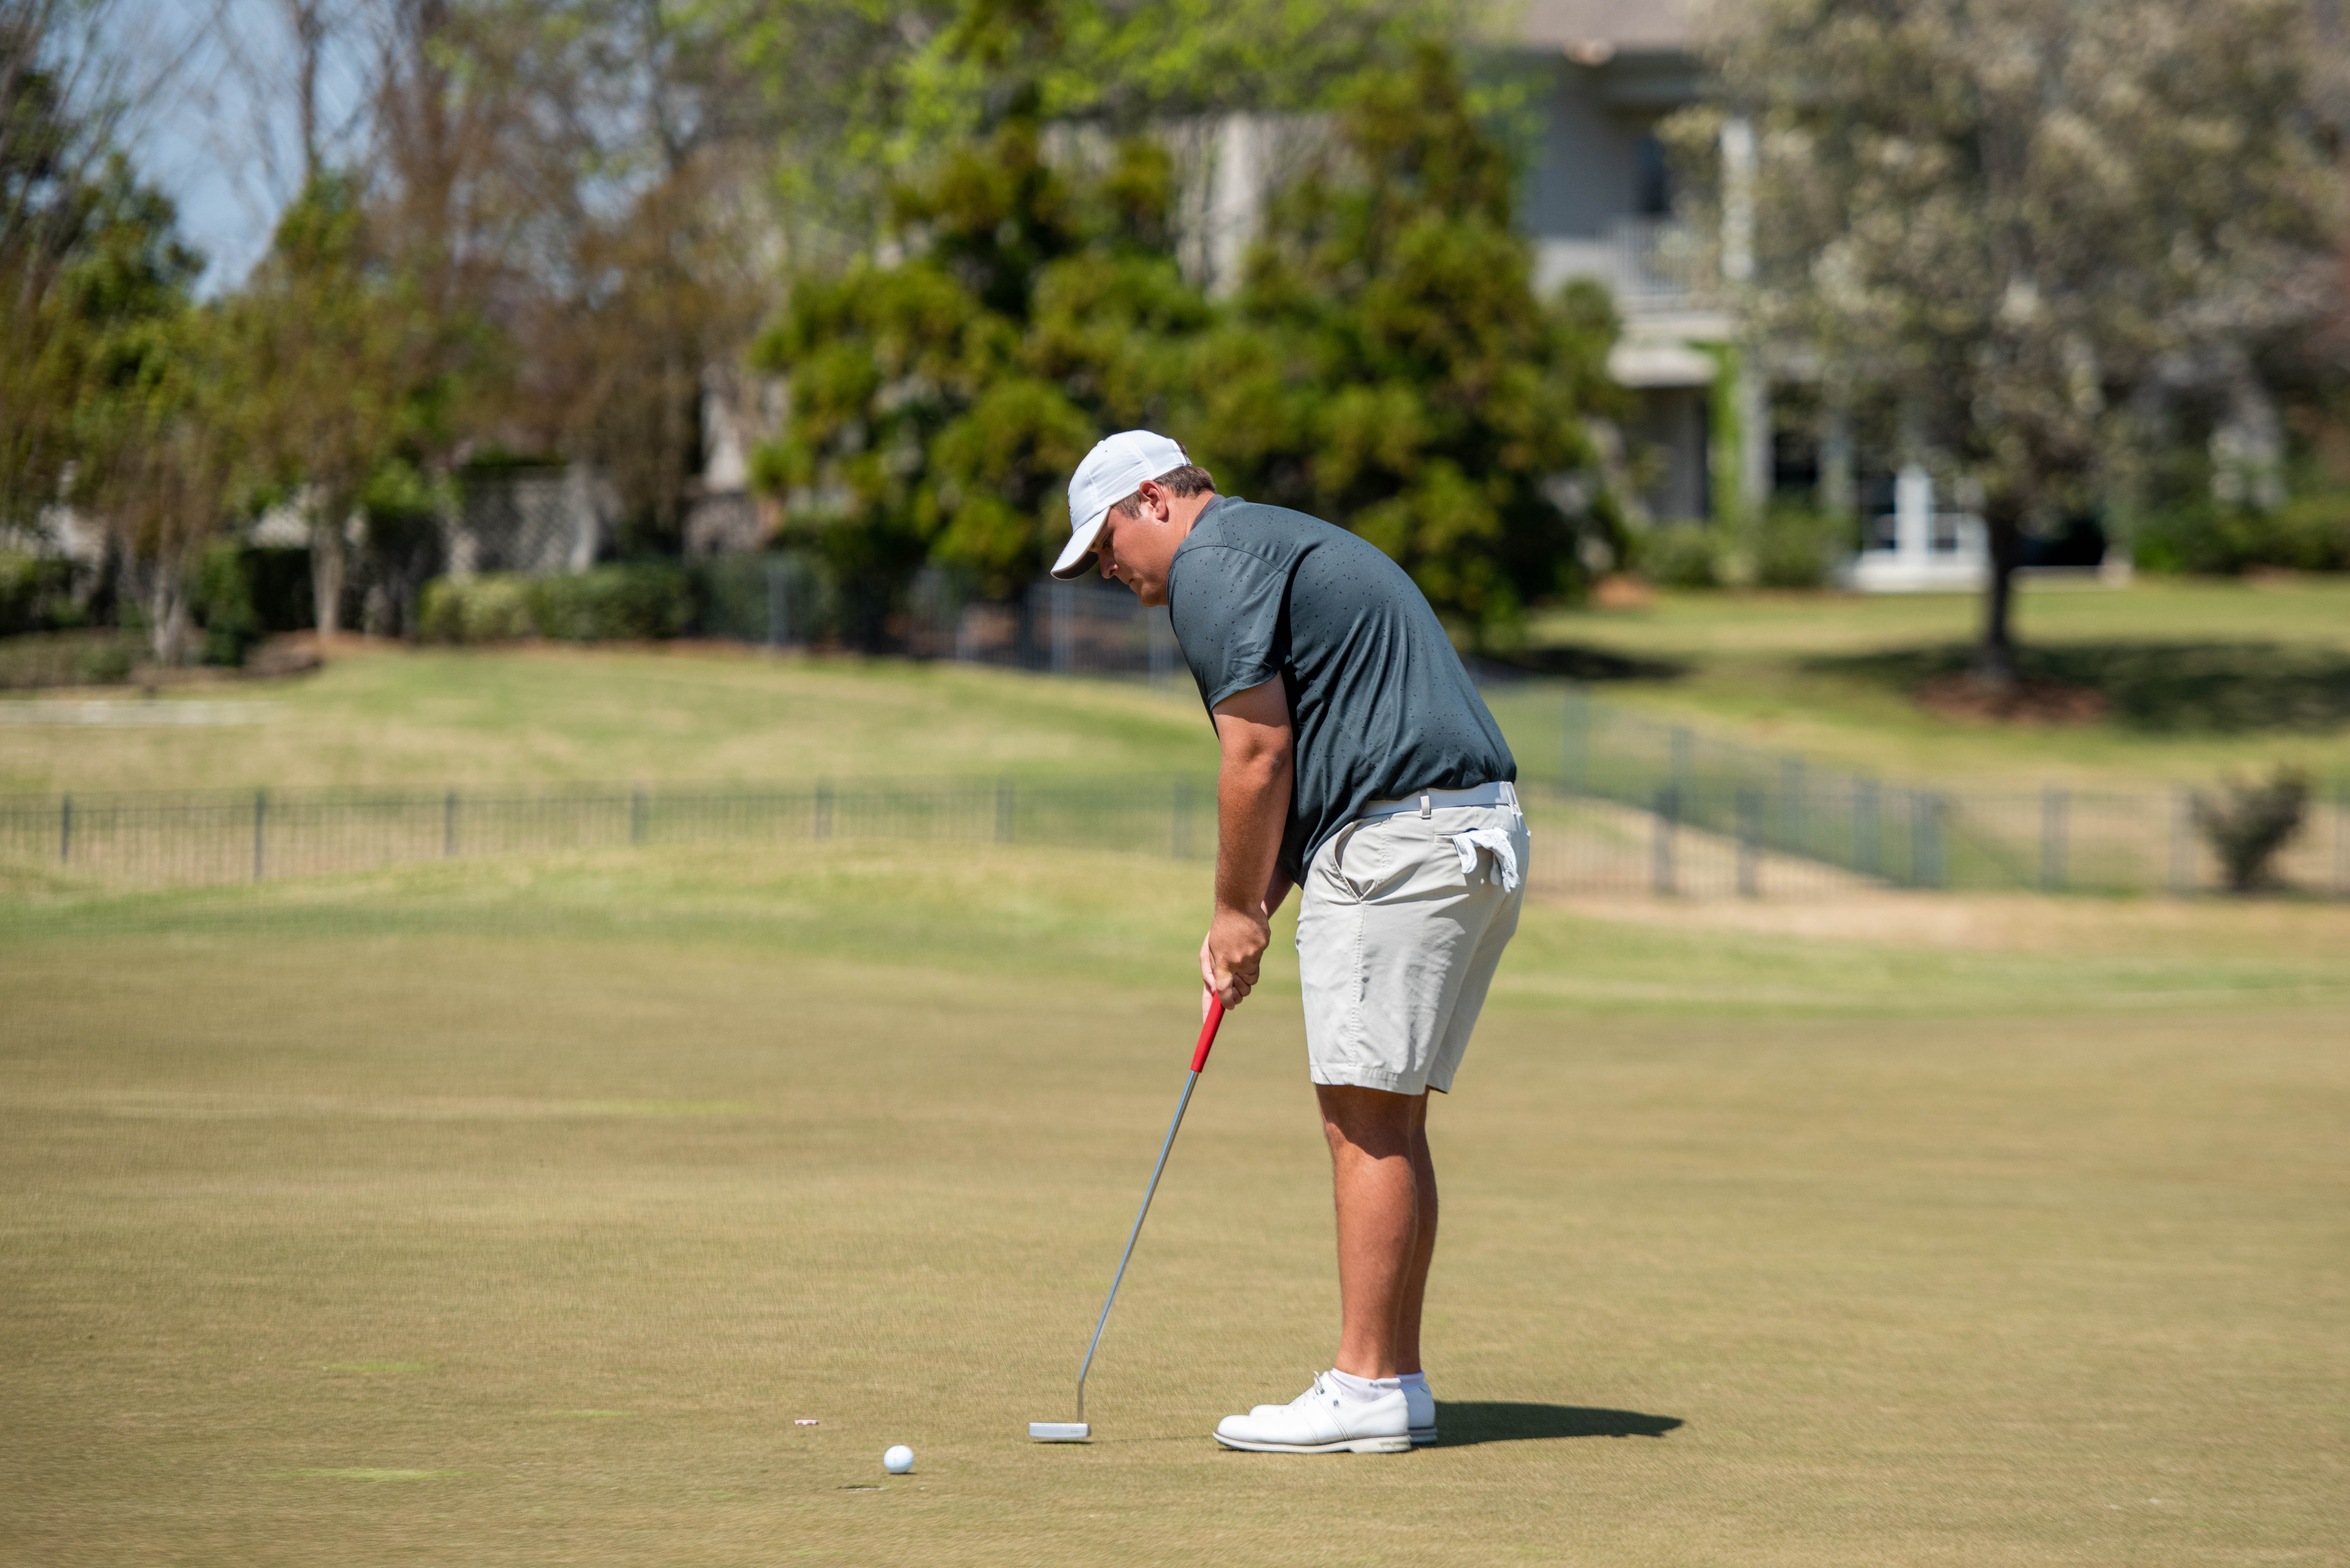 Hawks Compete in Day 1 of USA South Conference Championship, Round 1 Suspended